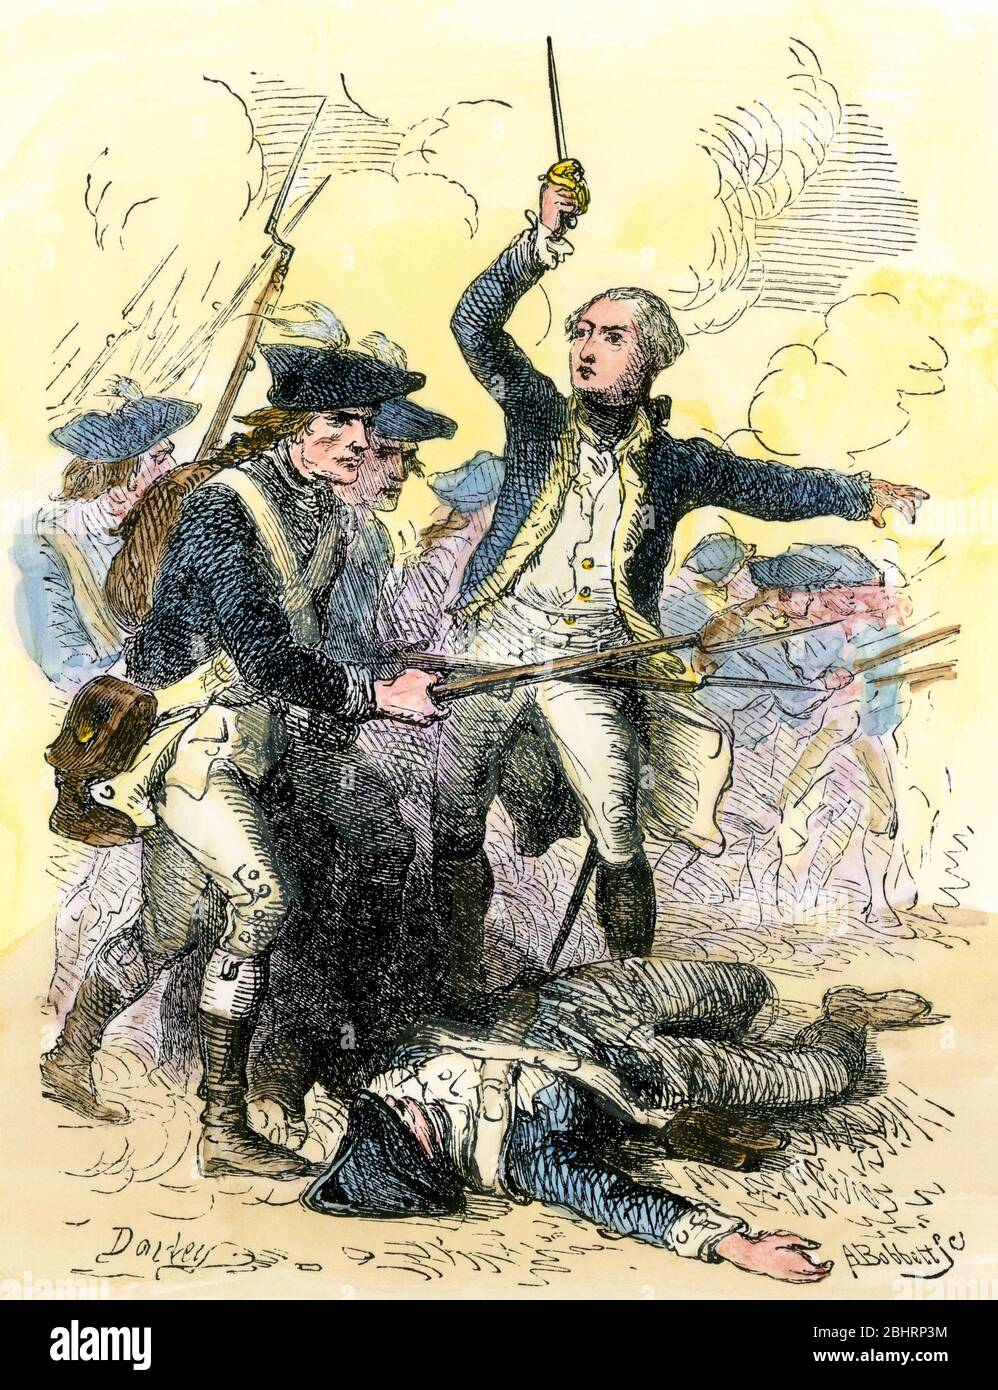 General Washington rallying American troops at the Brandywine, 1777.  Hand-colored woodcut of a Darley illustration Stock Photo